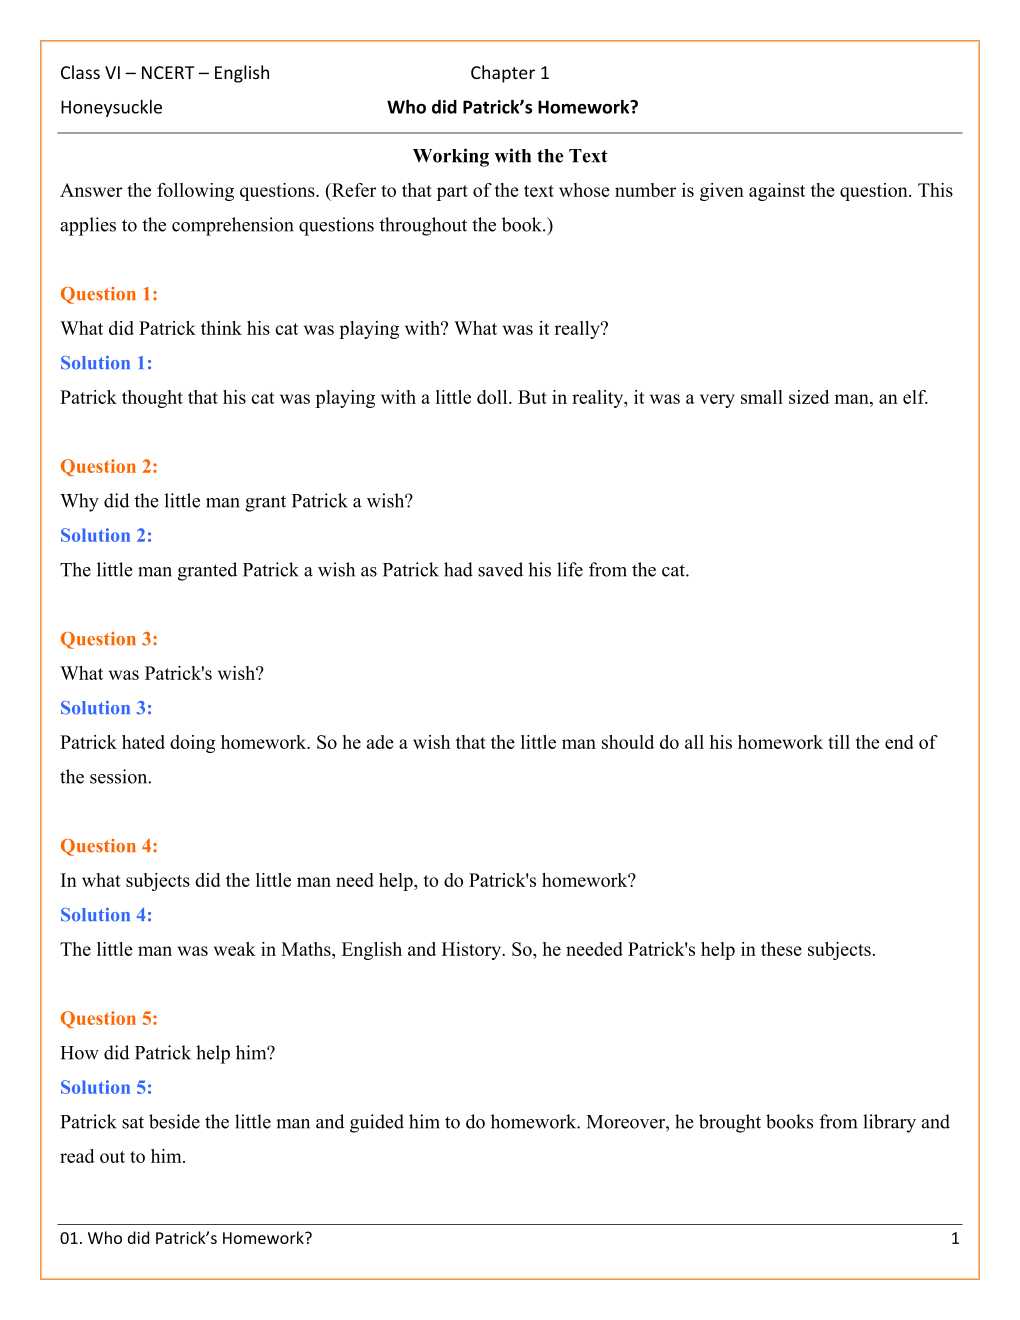 ncert-solutions-for-class-6-english-honeysuckle-chapter-1-who-did